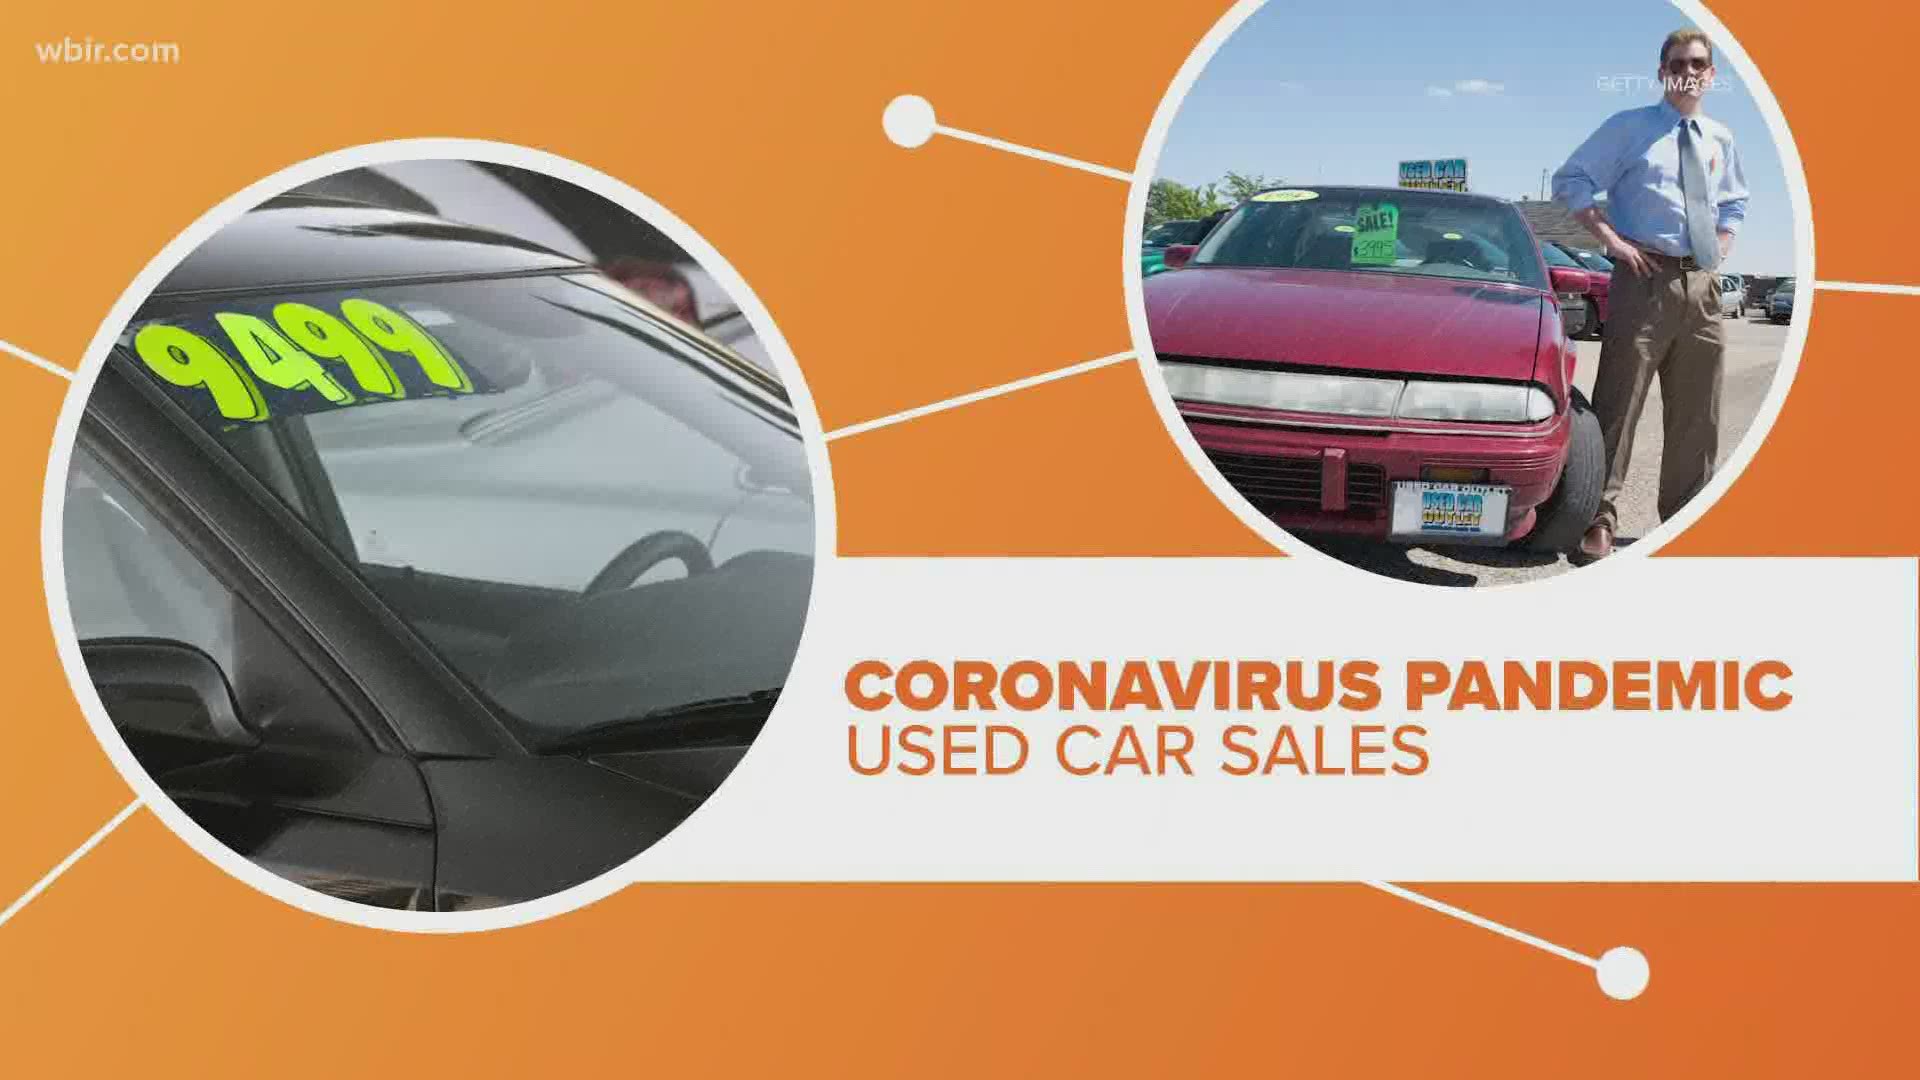 The global coronavirus pandemic is causing an unusual side effect, the price of used cars is going through the roof.